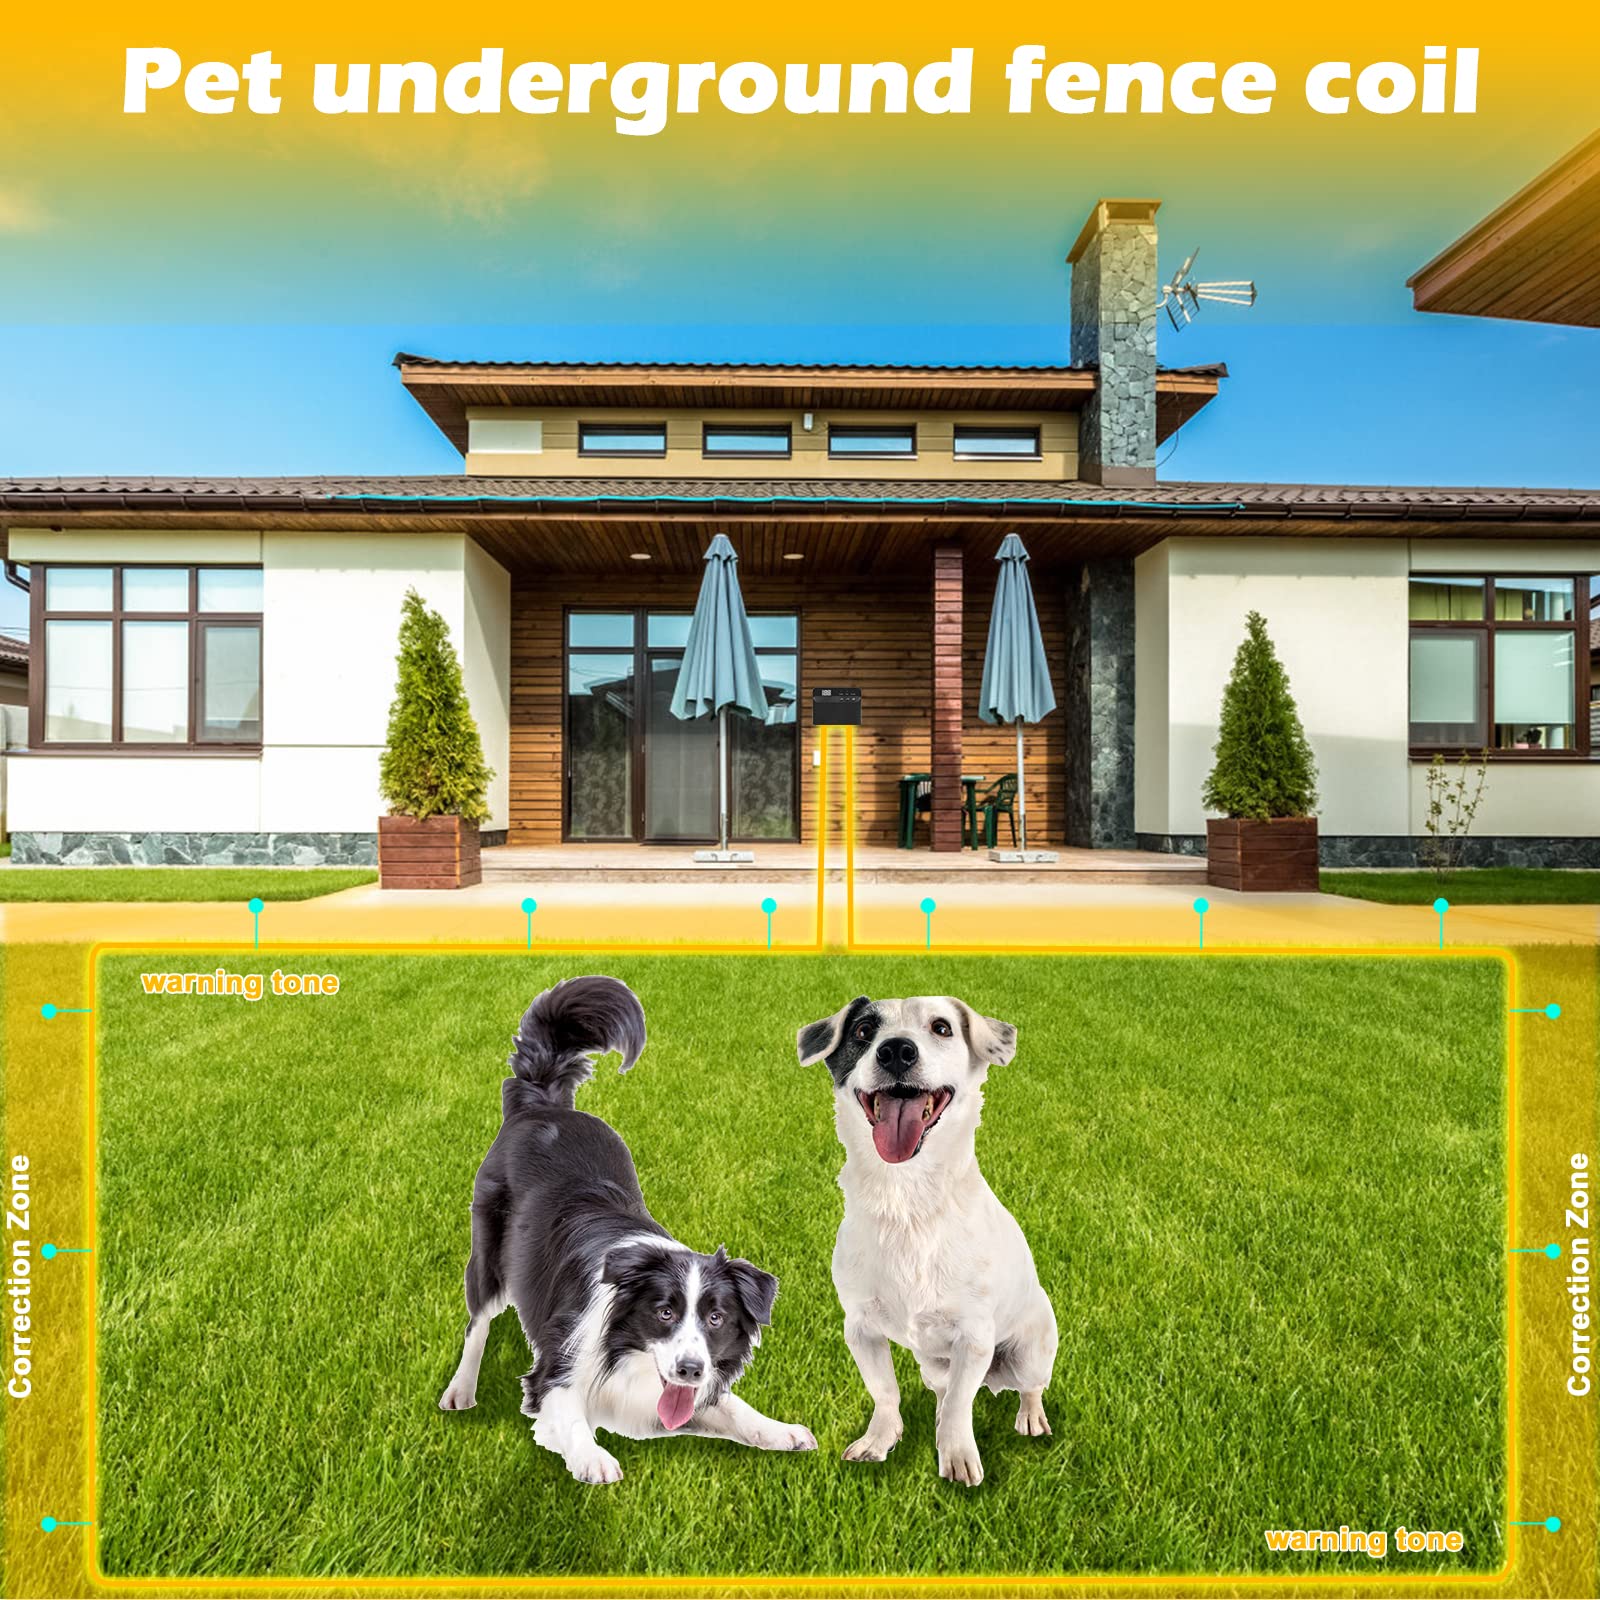 Boundary Wire 22 Gauge 500 Feet Electric Dog Fence Wire, Underground Dog Fence Wire, Extra or Replacement Wire to Extend Your Fence Boundary and All Other Underground Dog Fences Compatible (YELLOW)